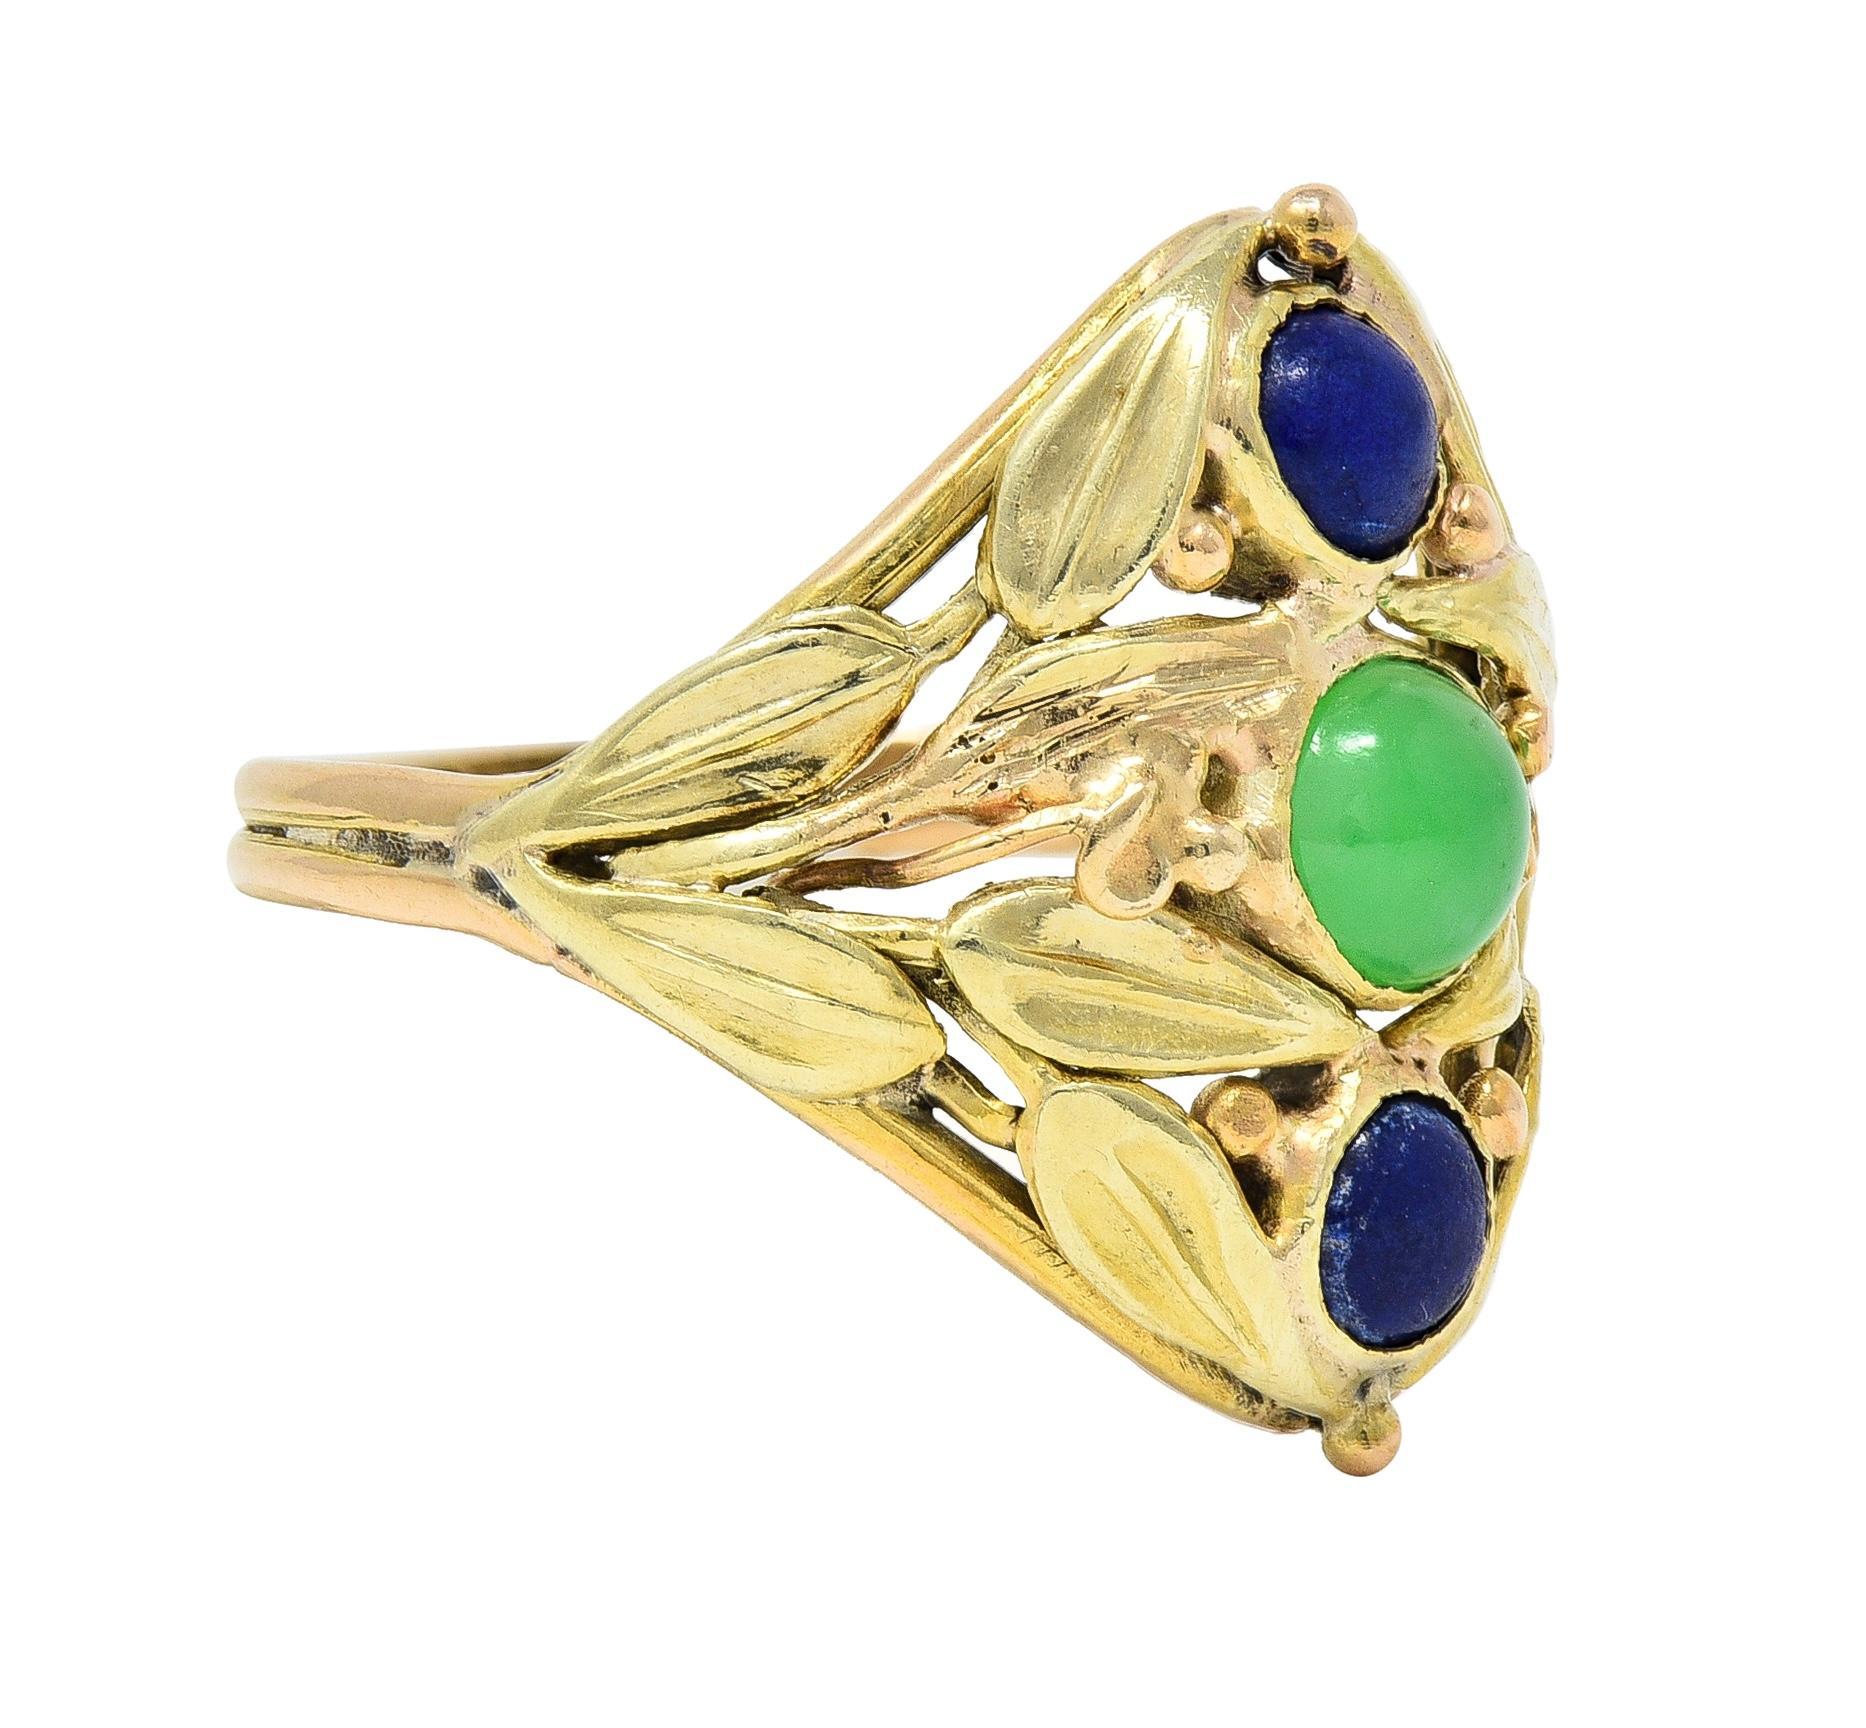 Designed as a rose gold navette shape comprised of yellow gold clustered foliage
Centering a row of jade and lapis lazuli round cabochons 
Jade measures 4.5 mm round - translucent, vibrant green
Lapis lazuli measures 3.5 mm round - opaque